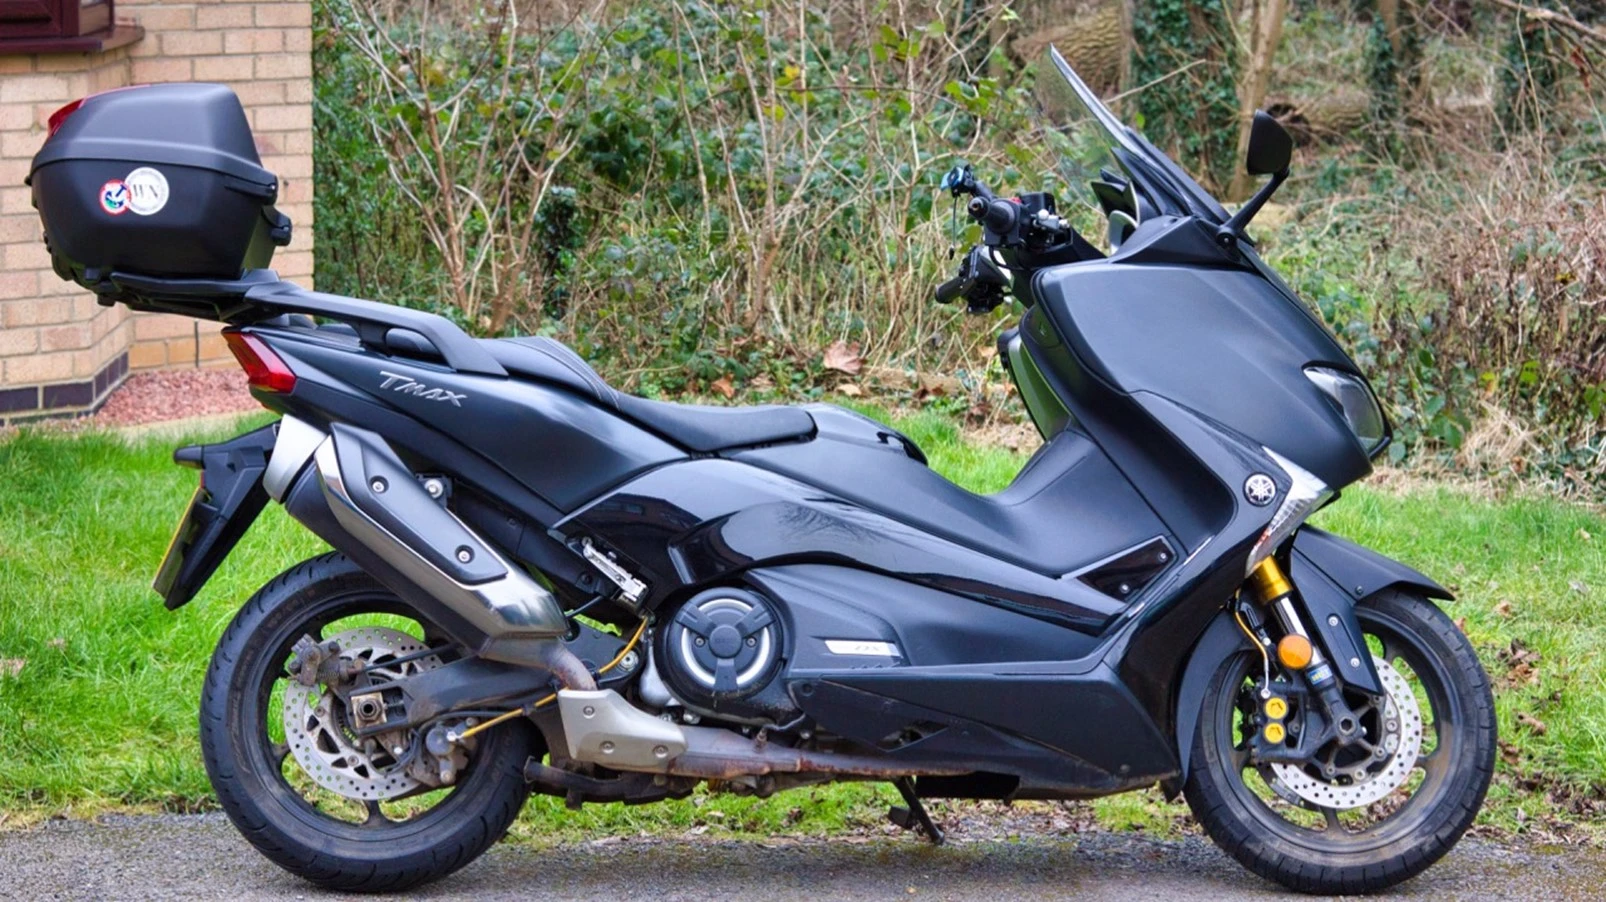 I Bought One: A 4,000-mile review of a 2017 Yamaha T-Max 530 DX